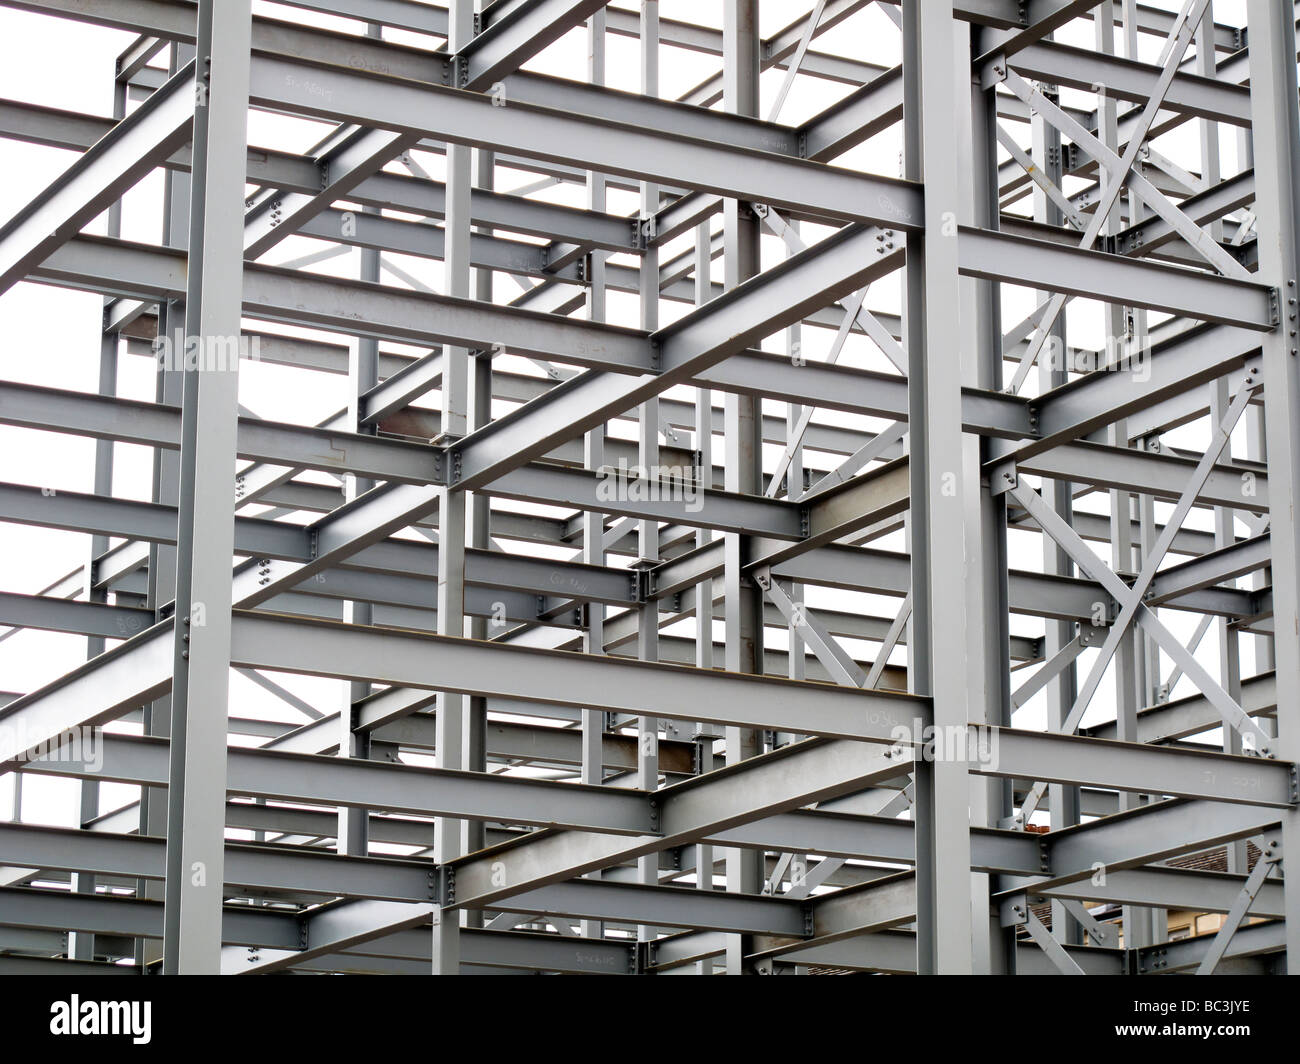 Steel framed building structure Stock Photo